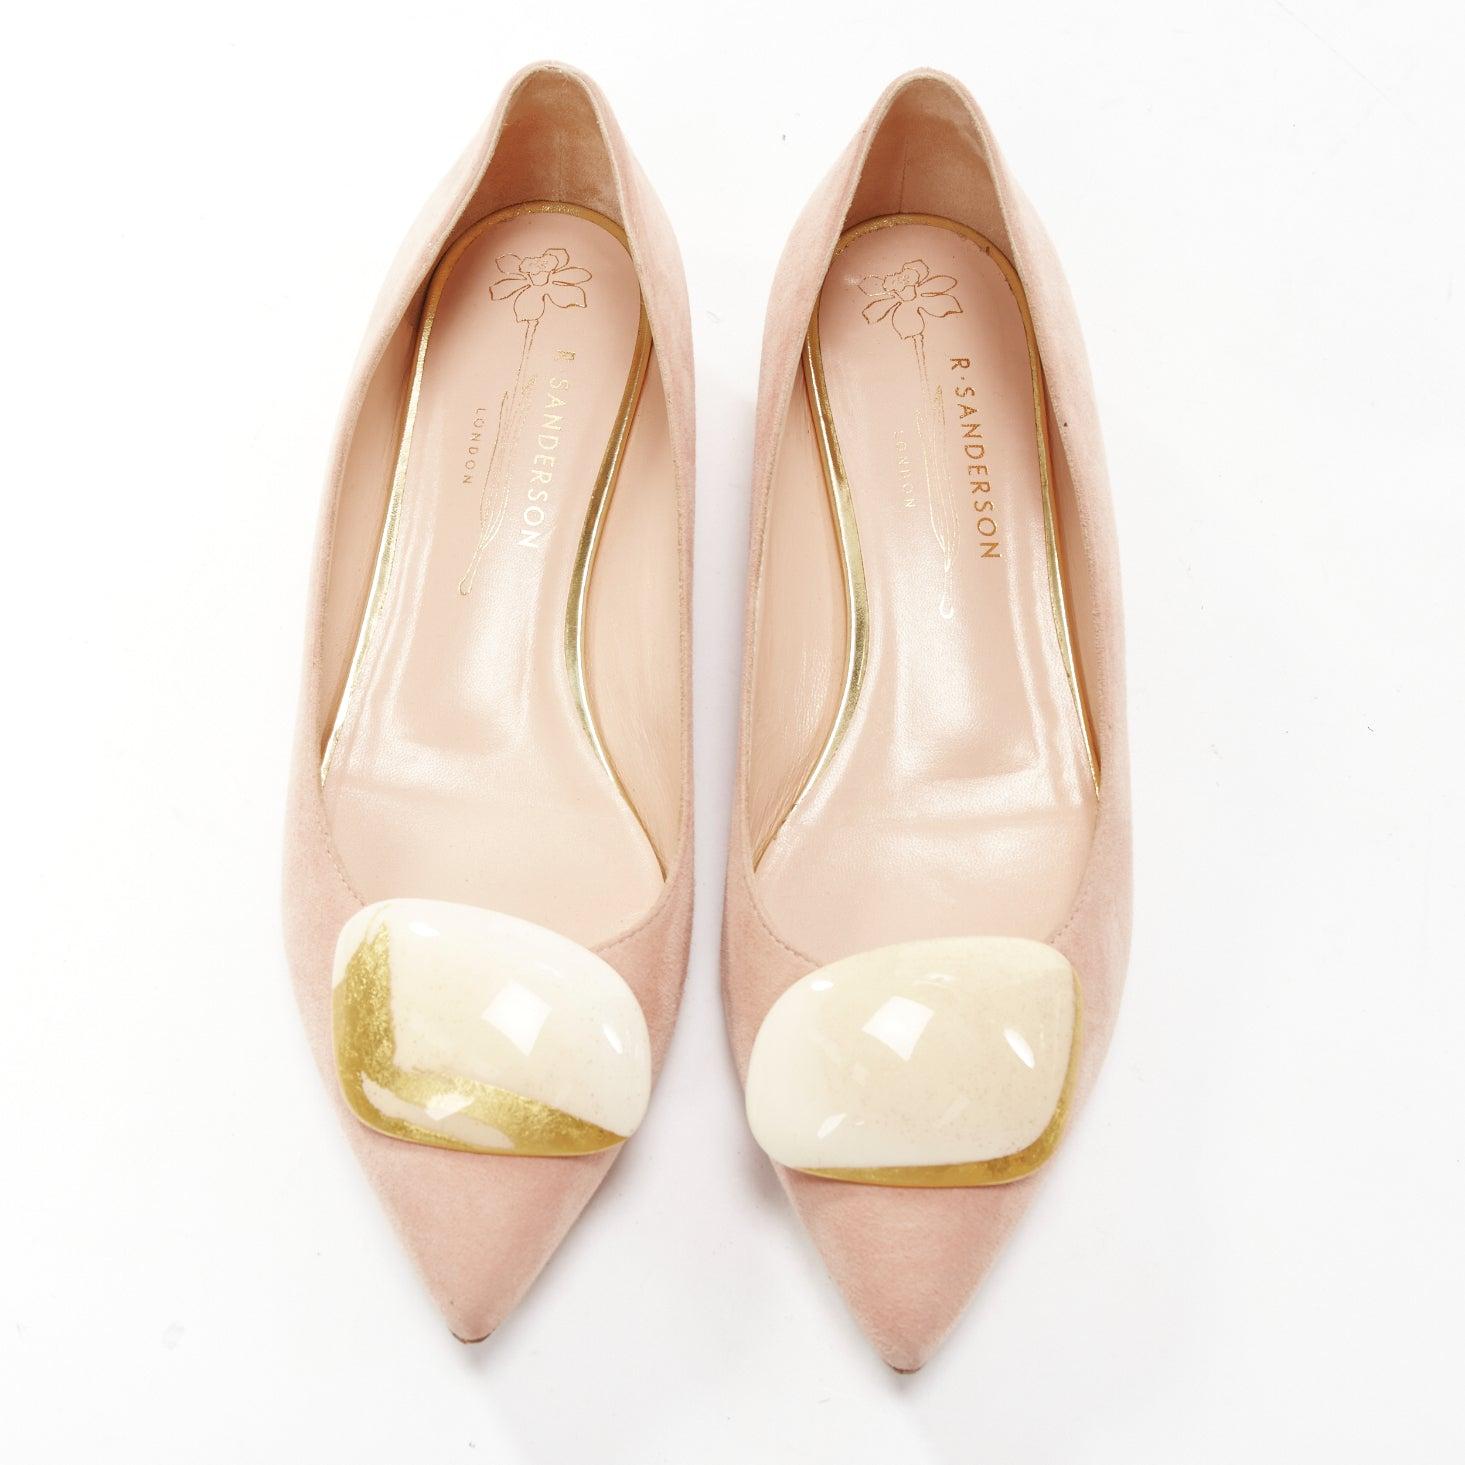 RUPERT SANDERSON pink blush suede nude gold buckles pointy flats EU37
Reference: KYCG/A00046
Brand: Rupert Sanderson
Material: Suede
Color: Pink, Nude
Pattern: Solid
Closure: Slip On
Lining: Nude Leather
Extra Details: Gold textured heel.
Made in: